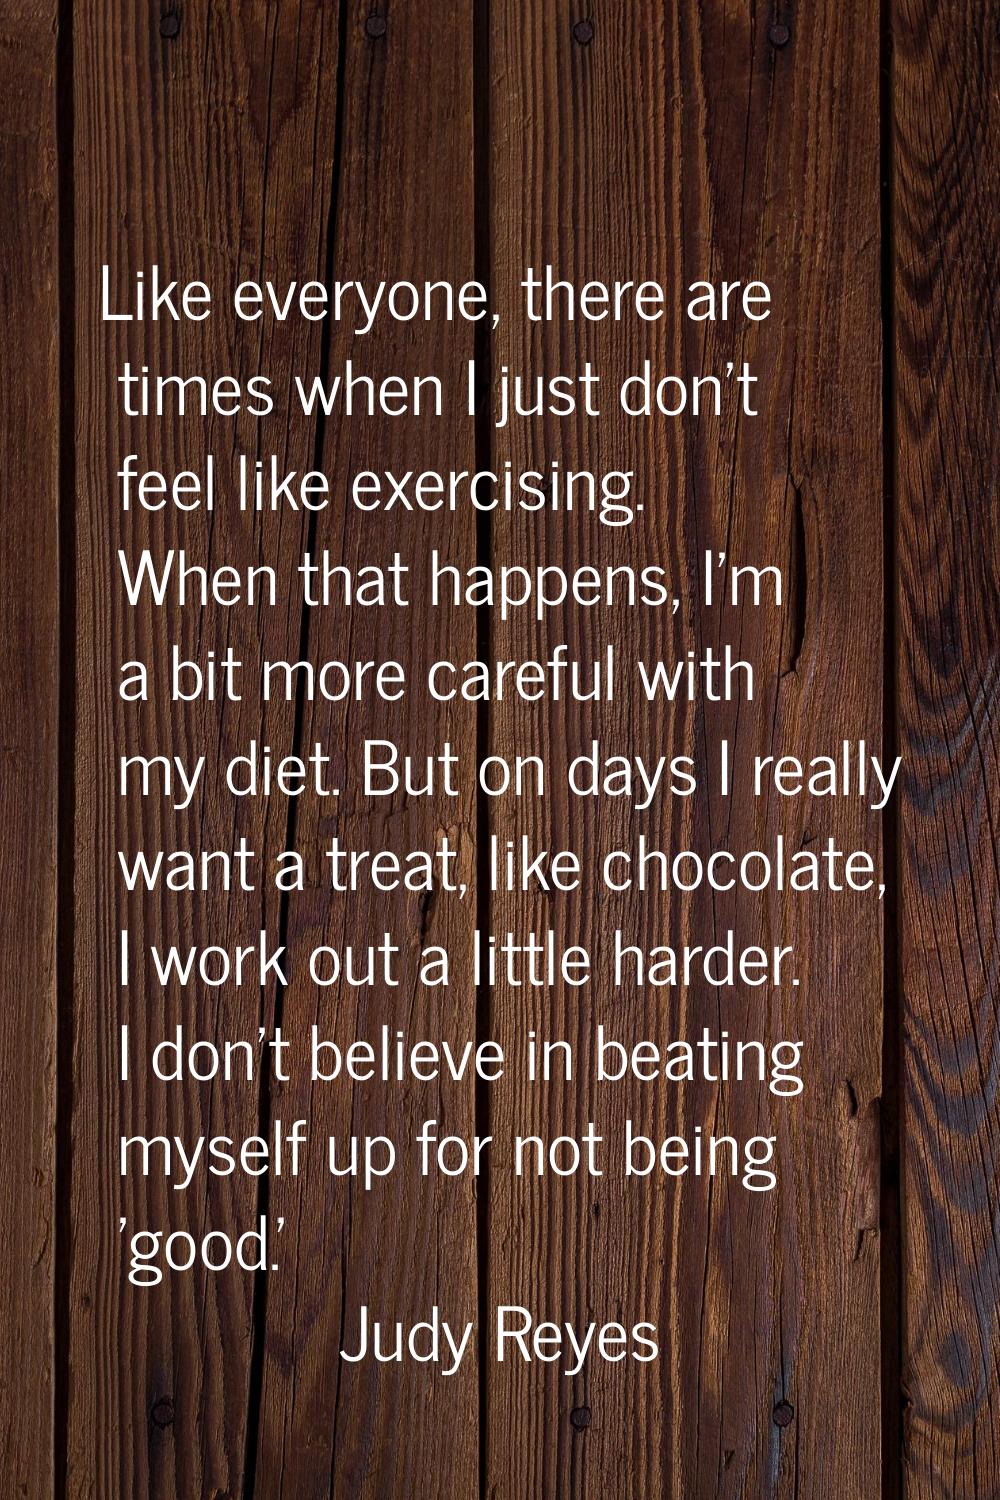 Like everyone, there are times when I just don't feel like exercising. When that happens, I'm a bit